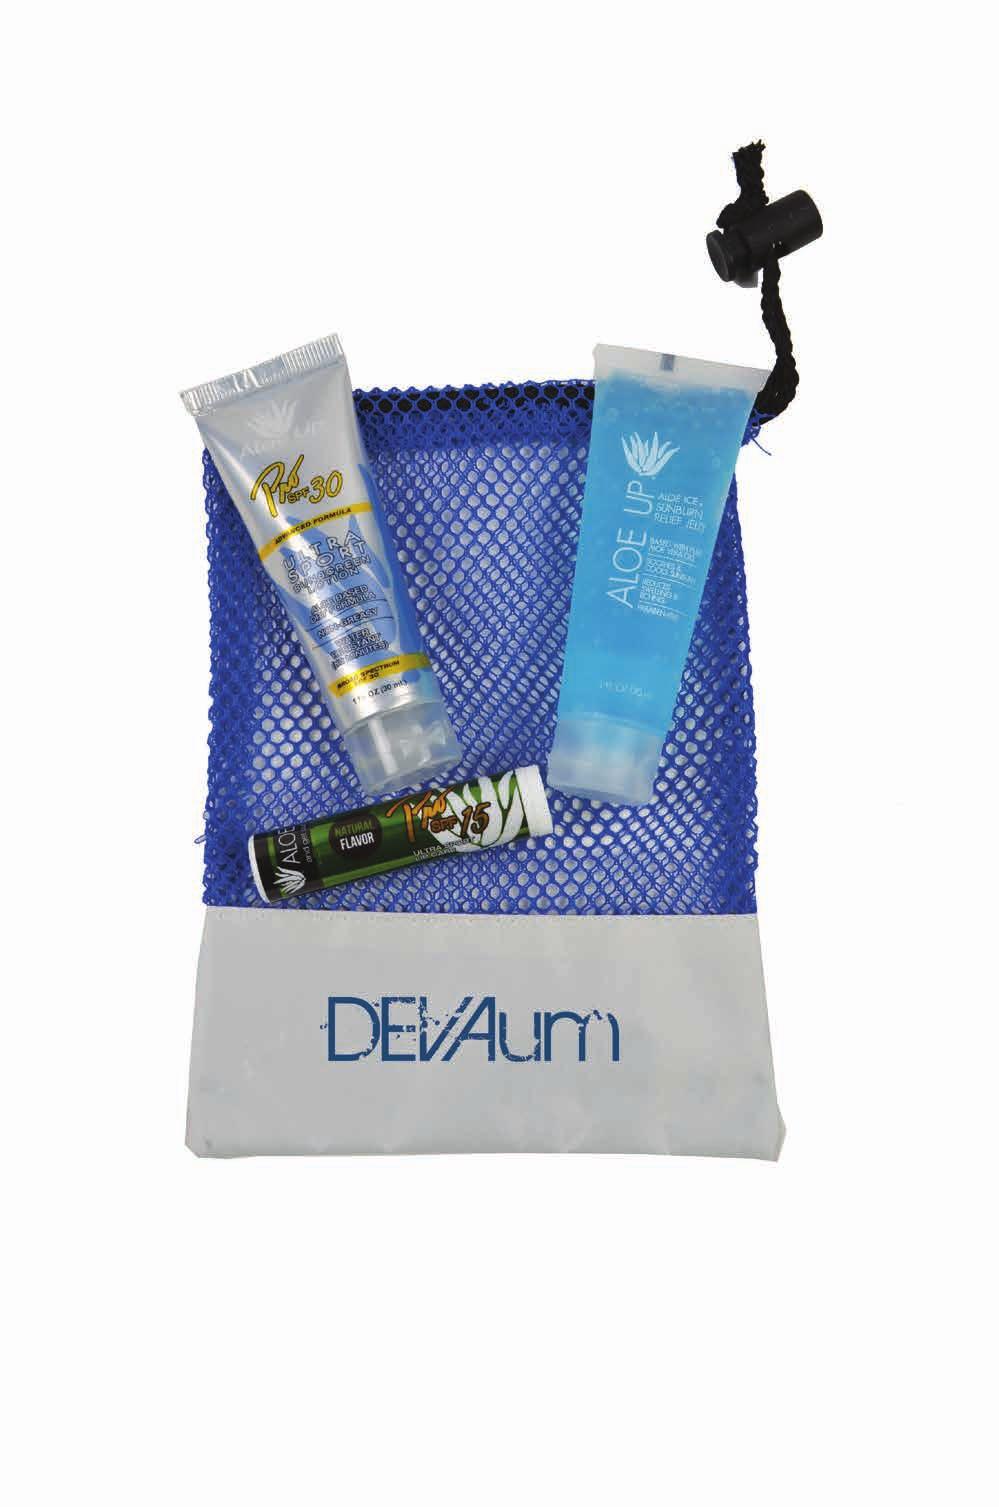 Aloe Up mesh bags are our most popular packaging option because they are simple, reusable and convenient. Great for any outdoor adventure or event. LM1001 Large Mesh with Pro Series 22.27 20.27 20.01 19.